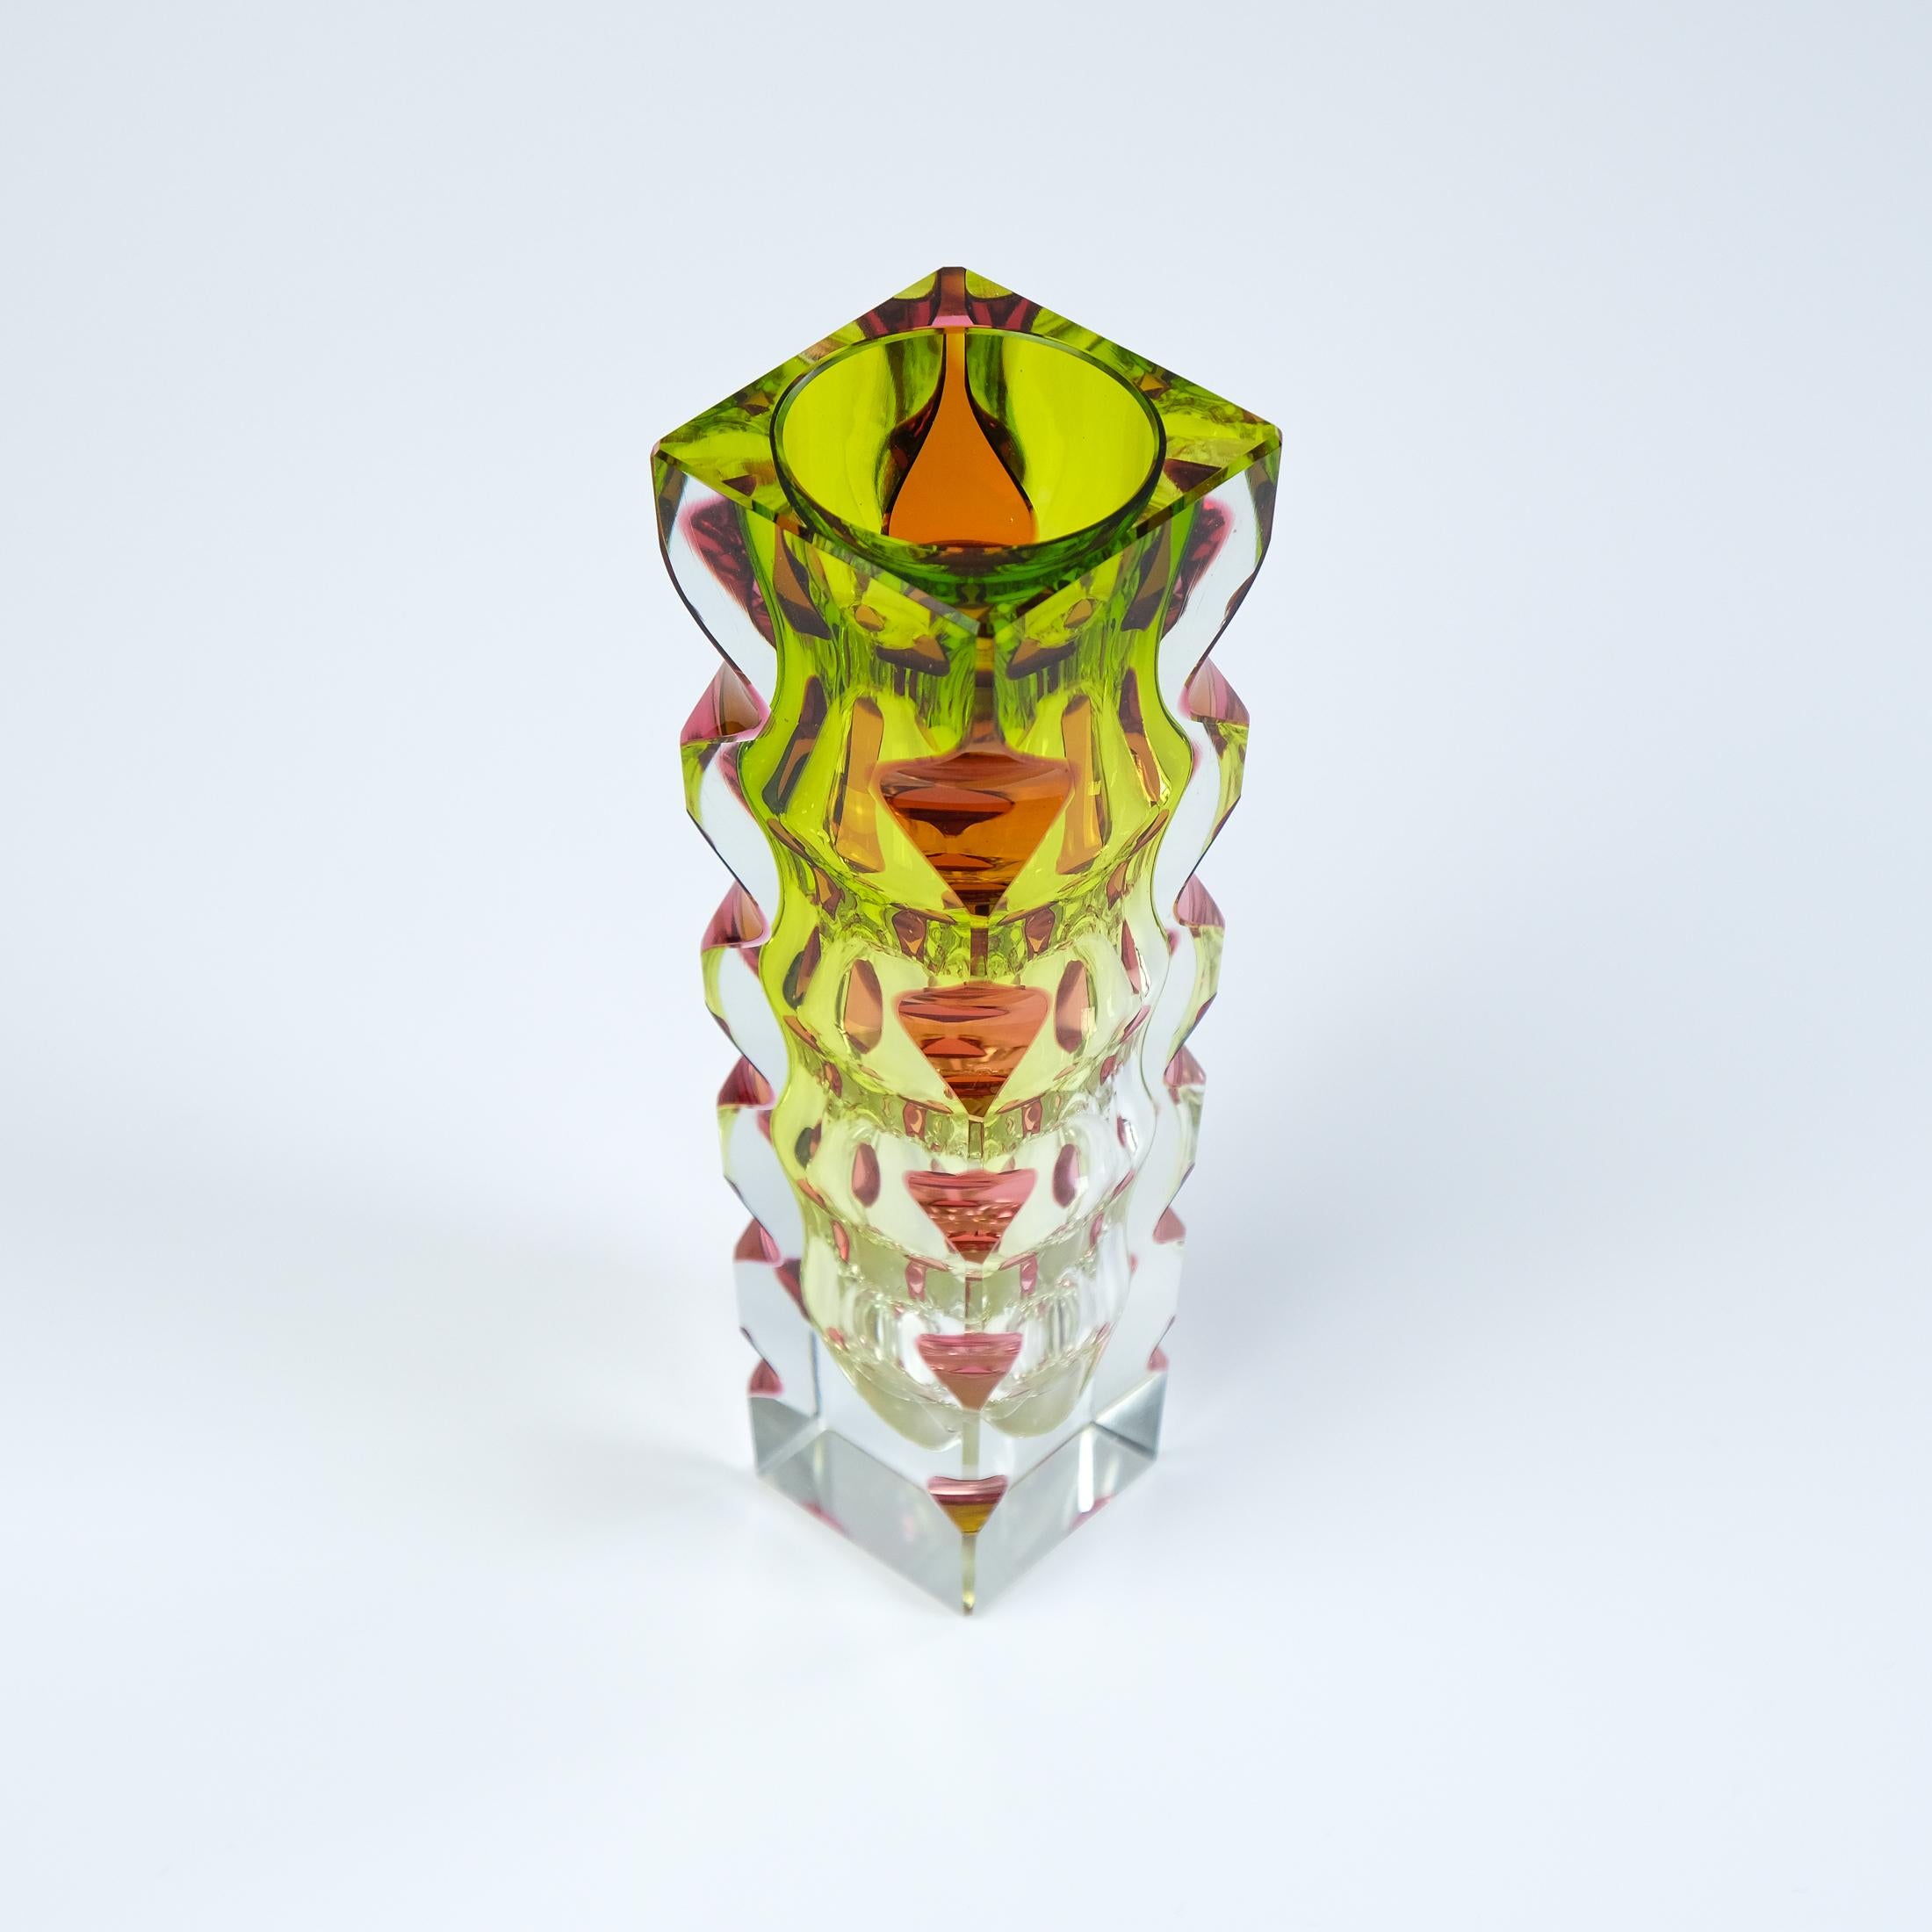 For sale is a Mid-Century Bohemian three-colour cased, cut and polished vase designed by renowned Czech glass artist, Oldrich Lipsky in c.1964 for the Novy Bor (EXBOR) glass foundry. 

The vase, which is made of pink, green and clear glass, creates